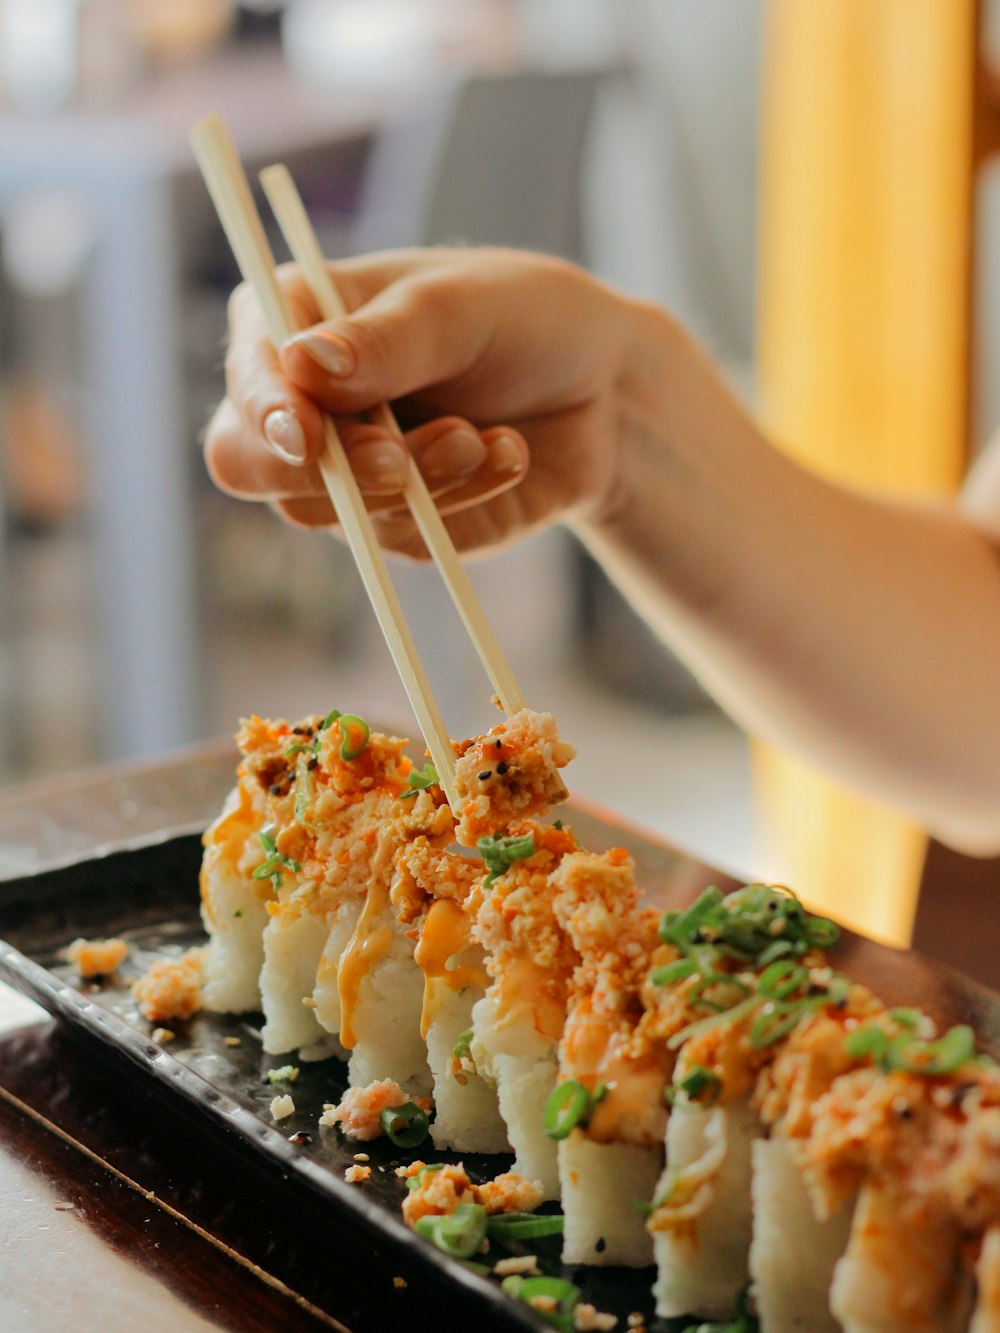 a person holding chopsticks over a plate of food